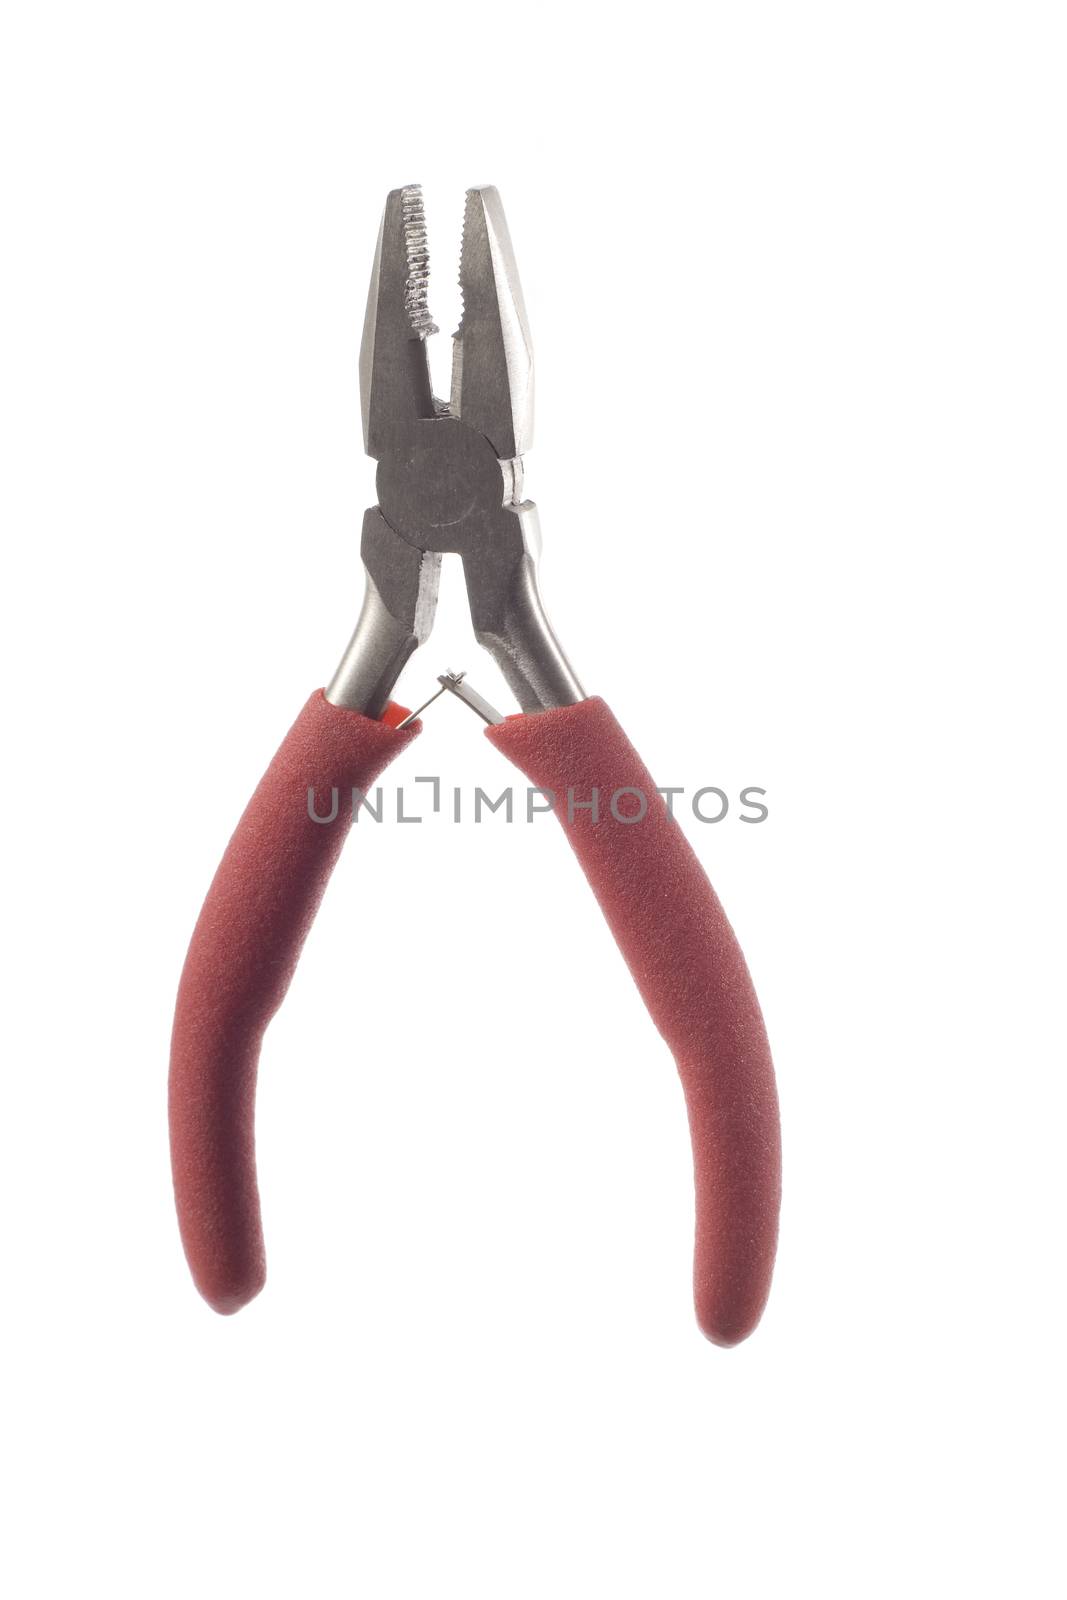 red handle plier on white background